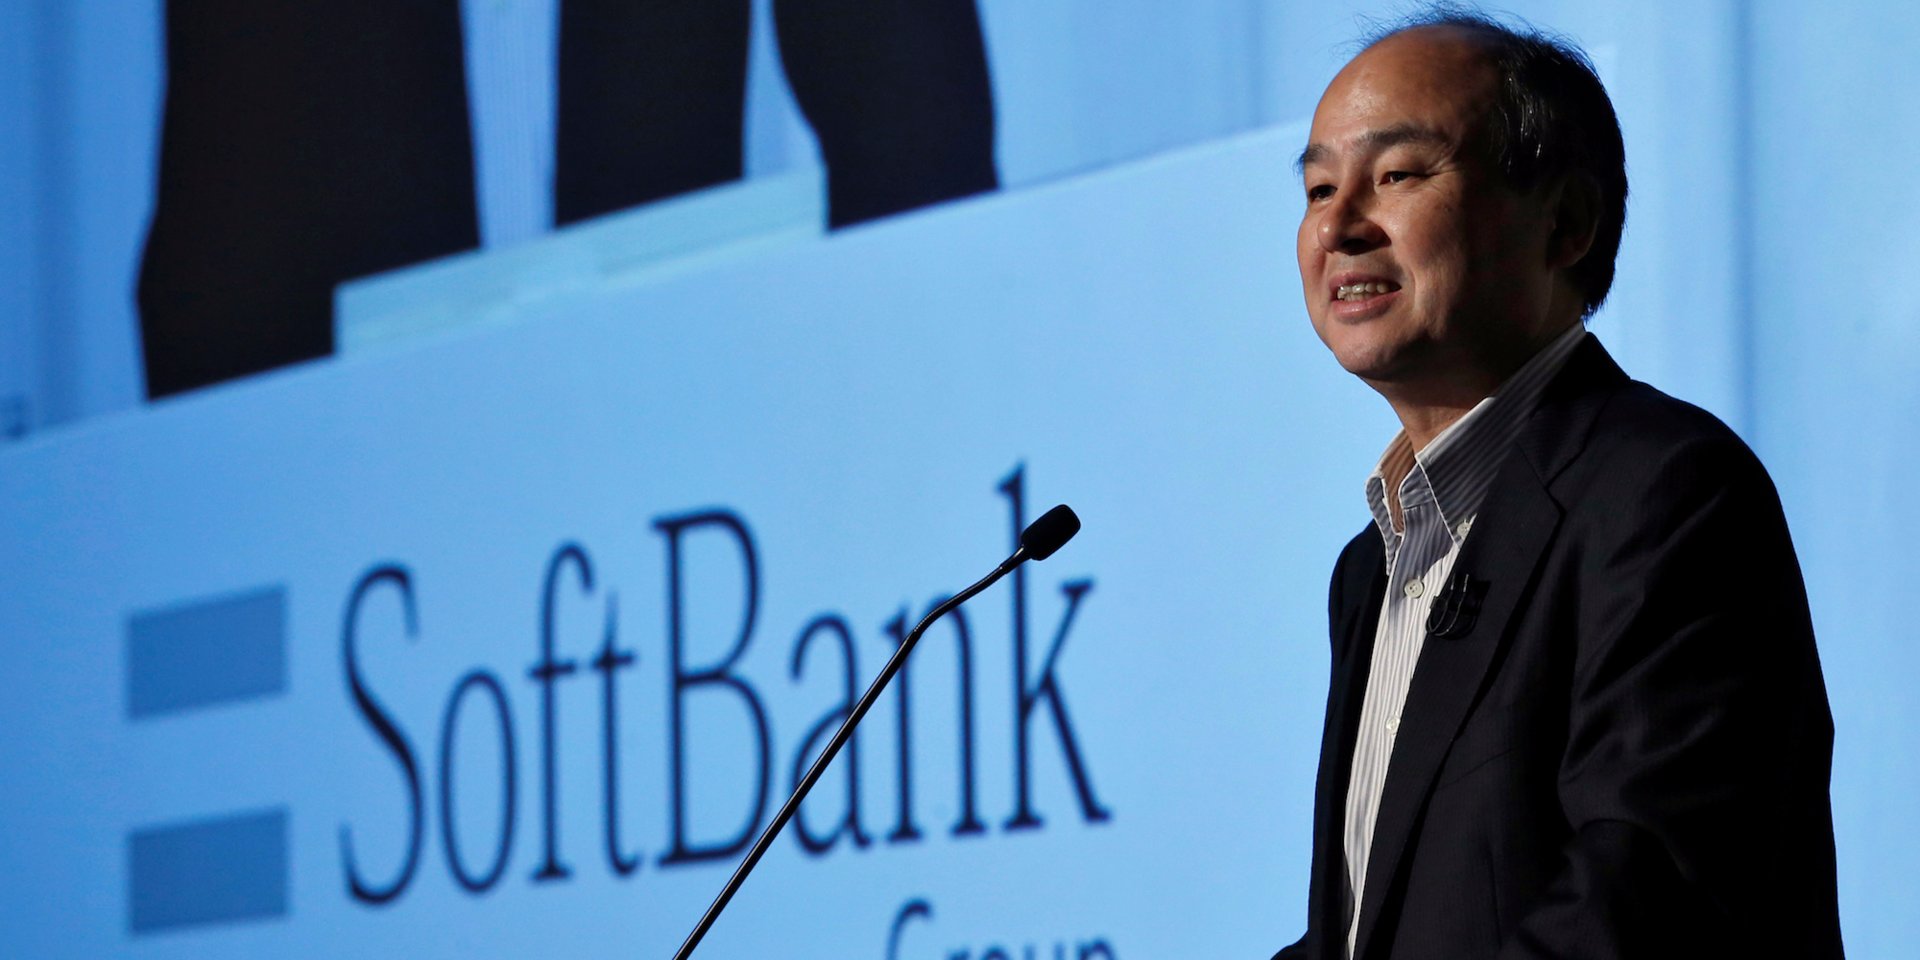 Softbank plans to lend its employees and CEO $20 billion to invest in its ambitious technology fund